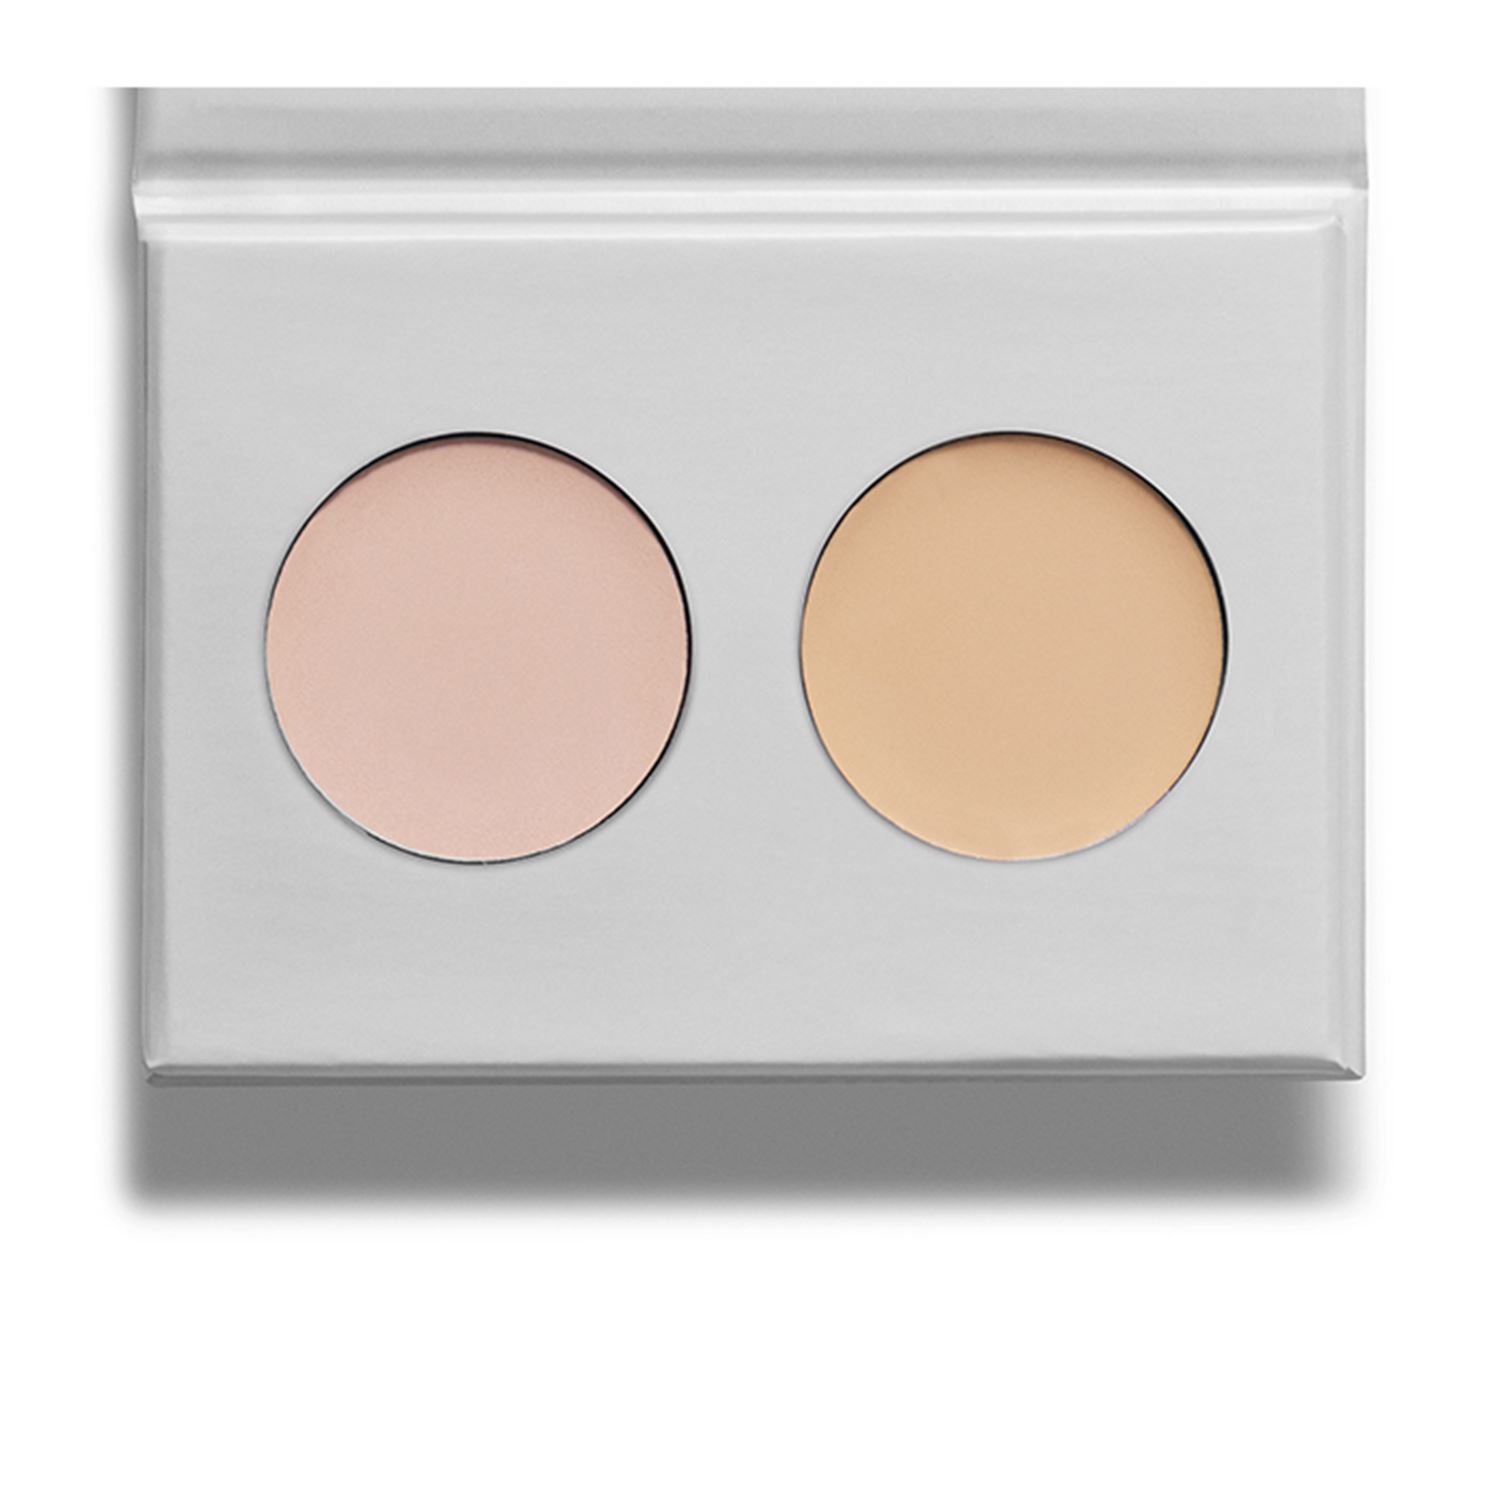  Natural Mineral Concealer Duo, 02 Medium Boon